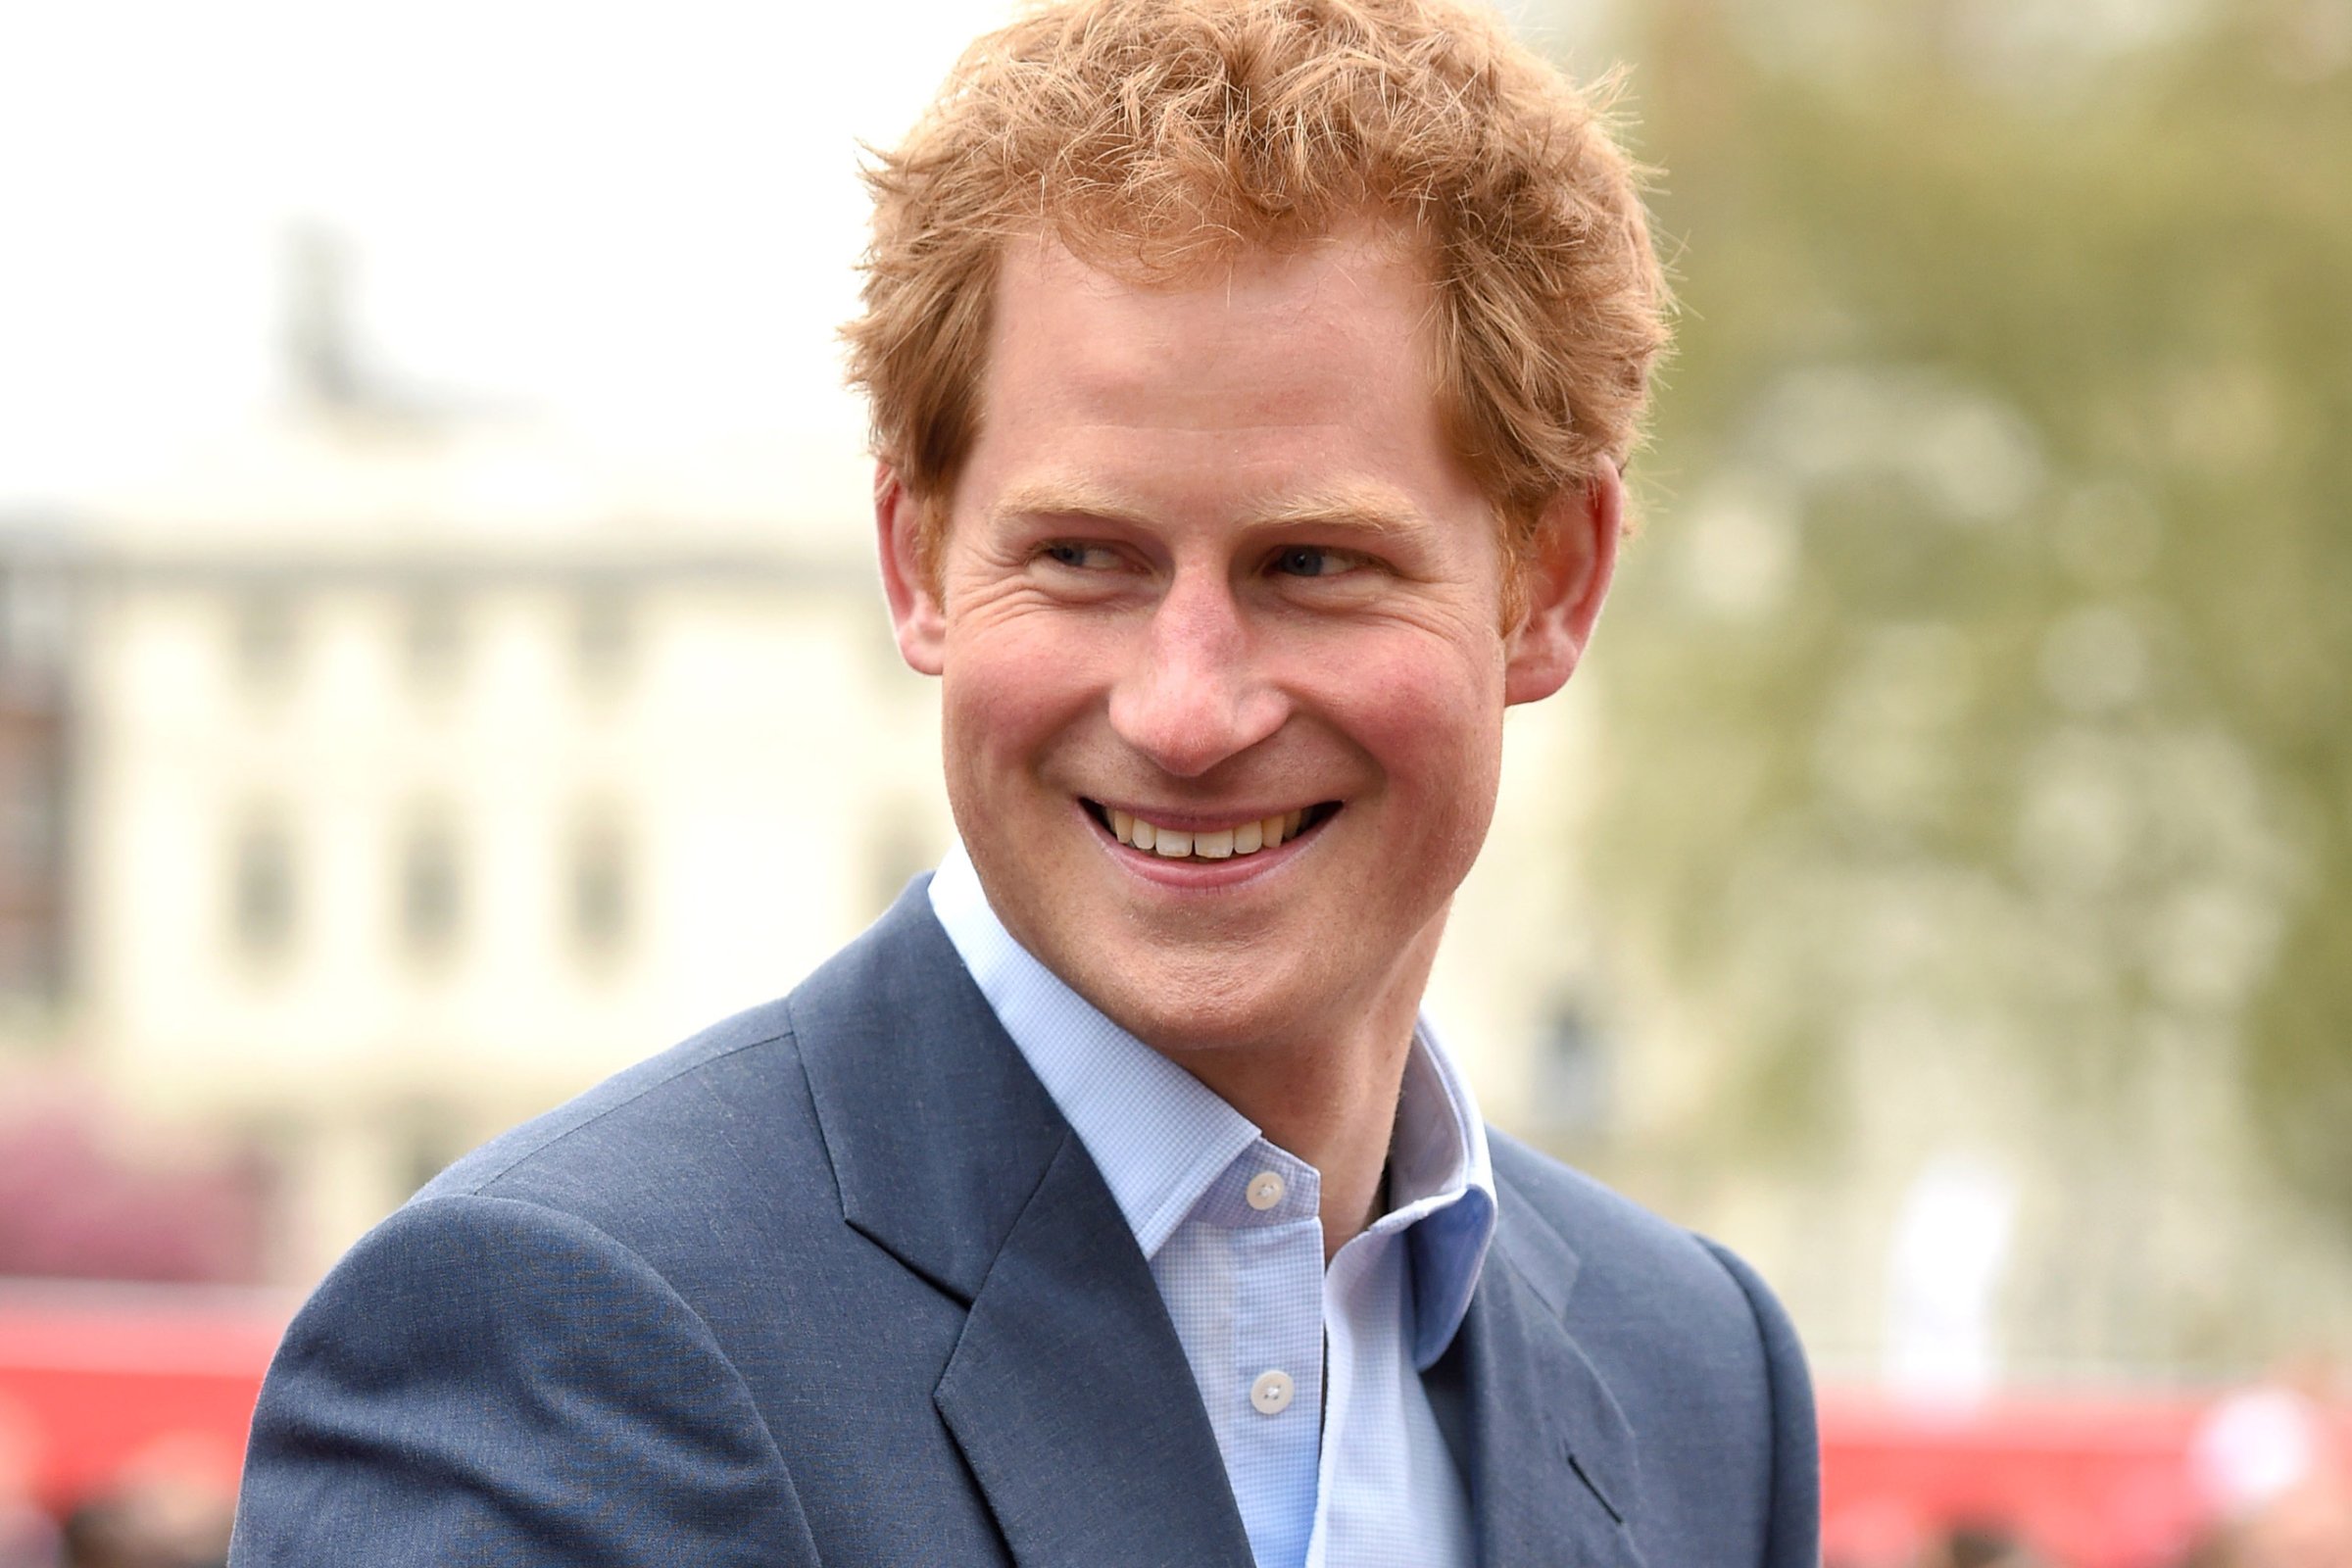 Prince Harry attends the London Marathon on April 26, 2015 in London.